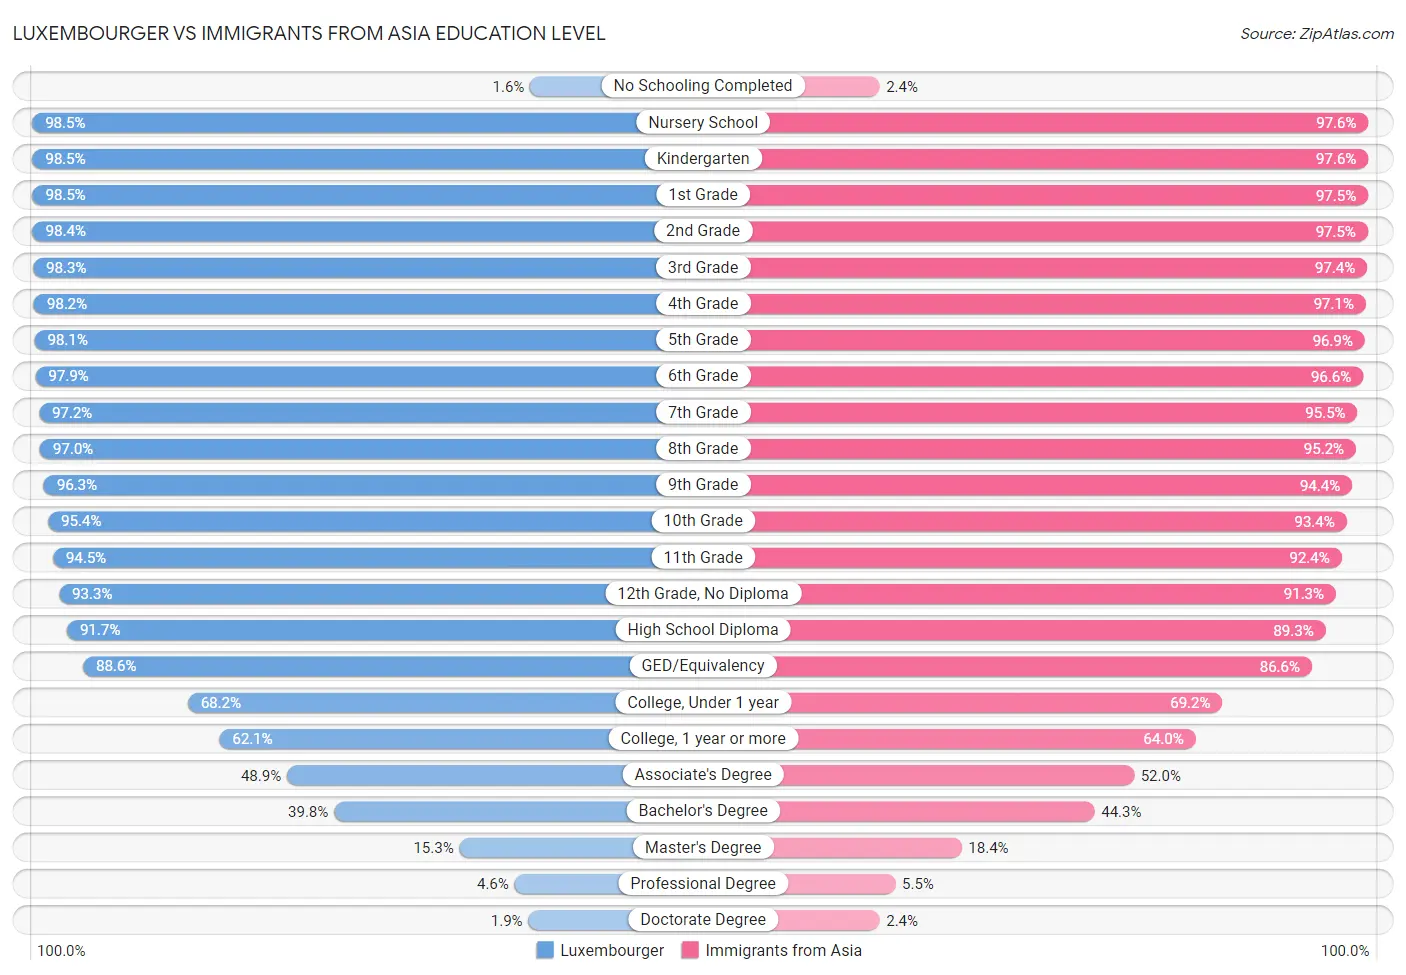 Luxembourger vs Immigrants from Asia Education Level